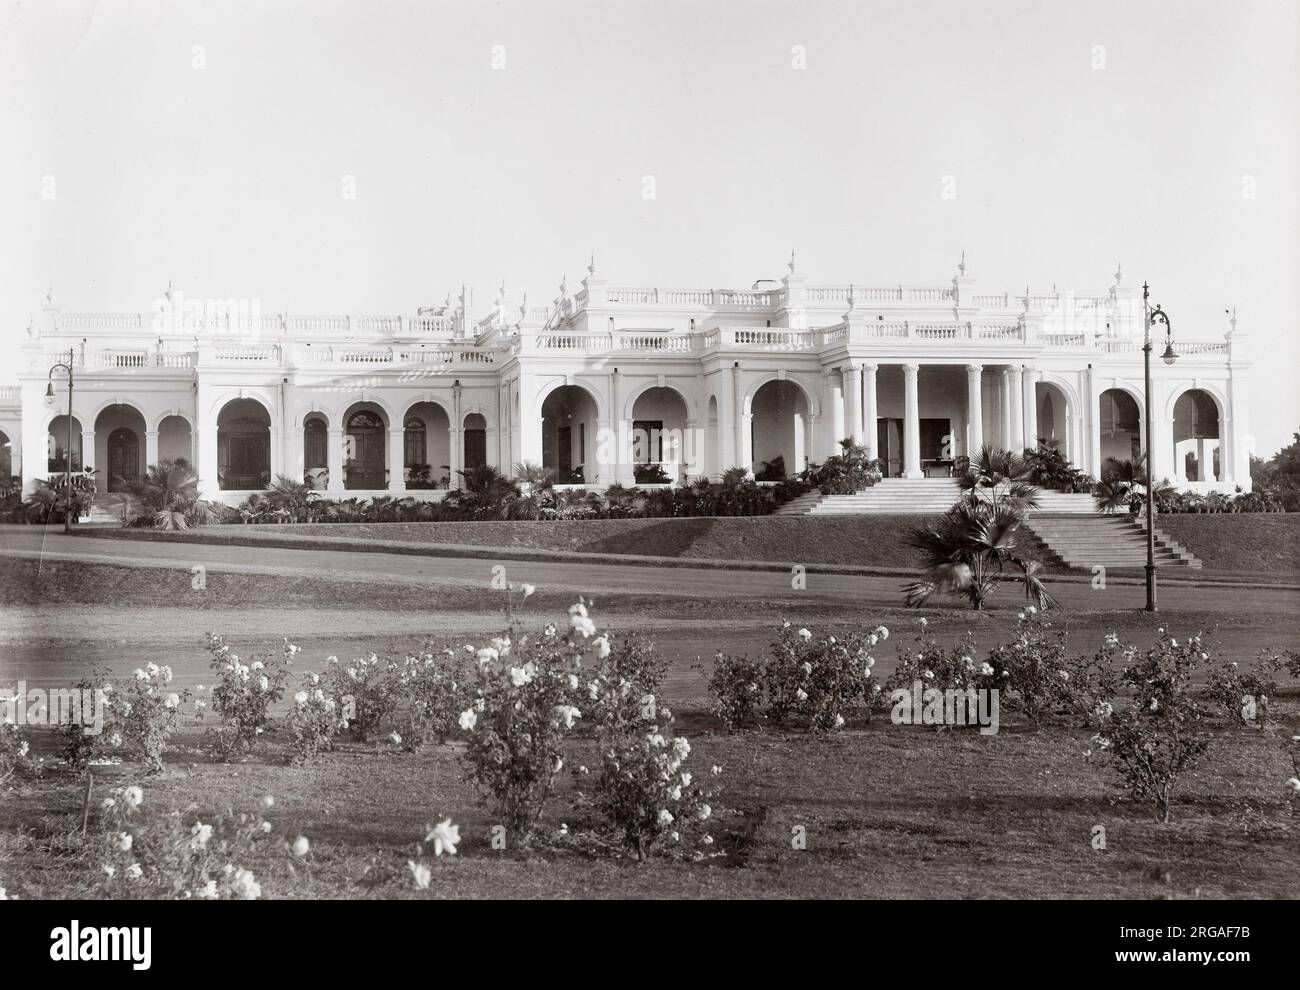 Early 20th century - vintage photograph of buildings, New Delhi, India. Stock Photo